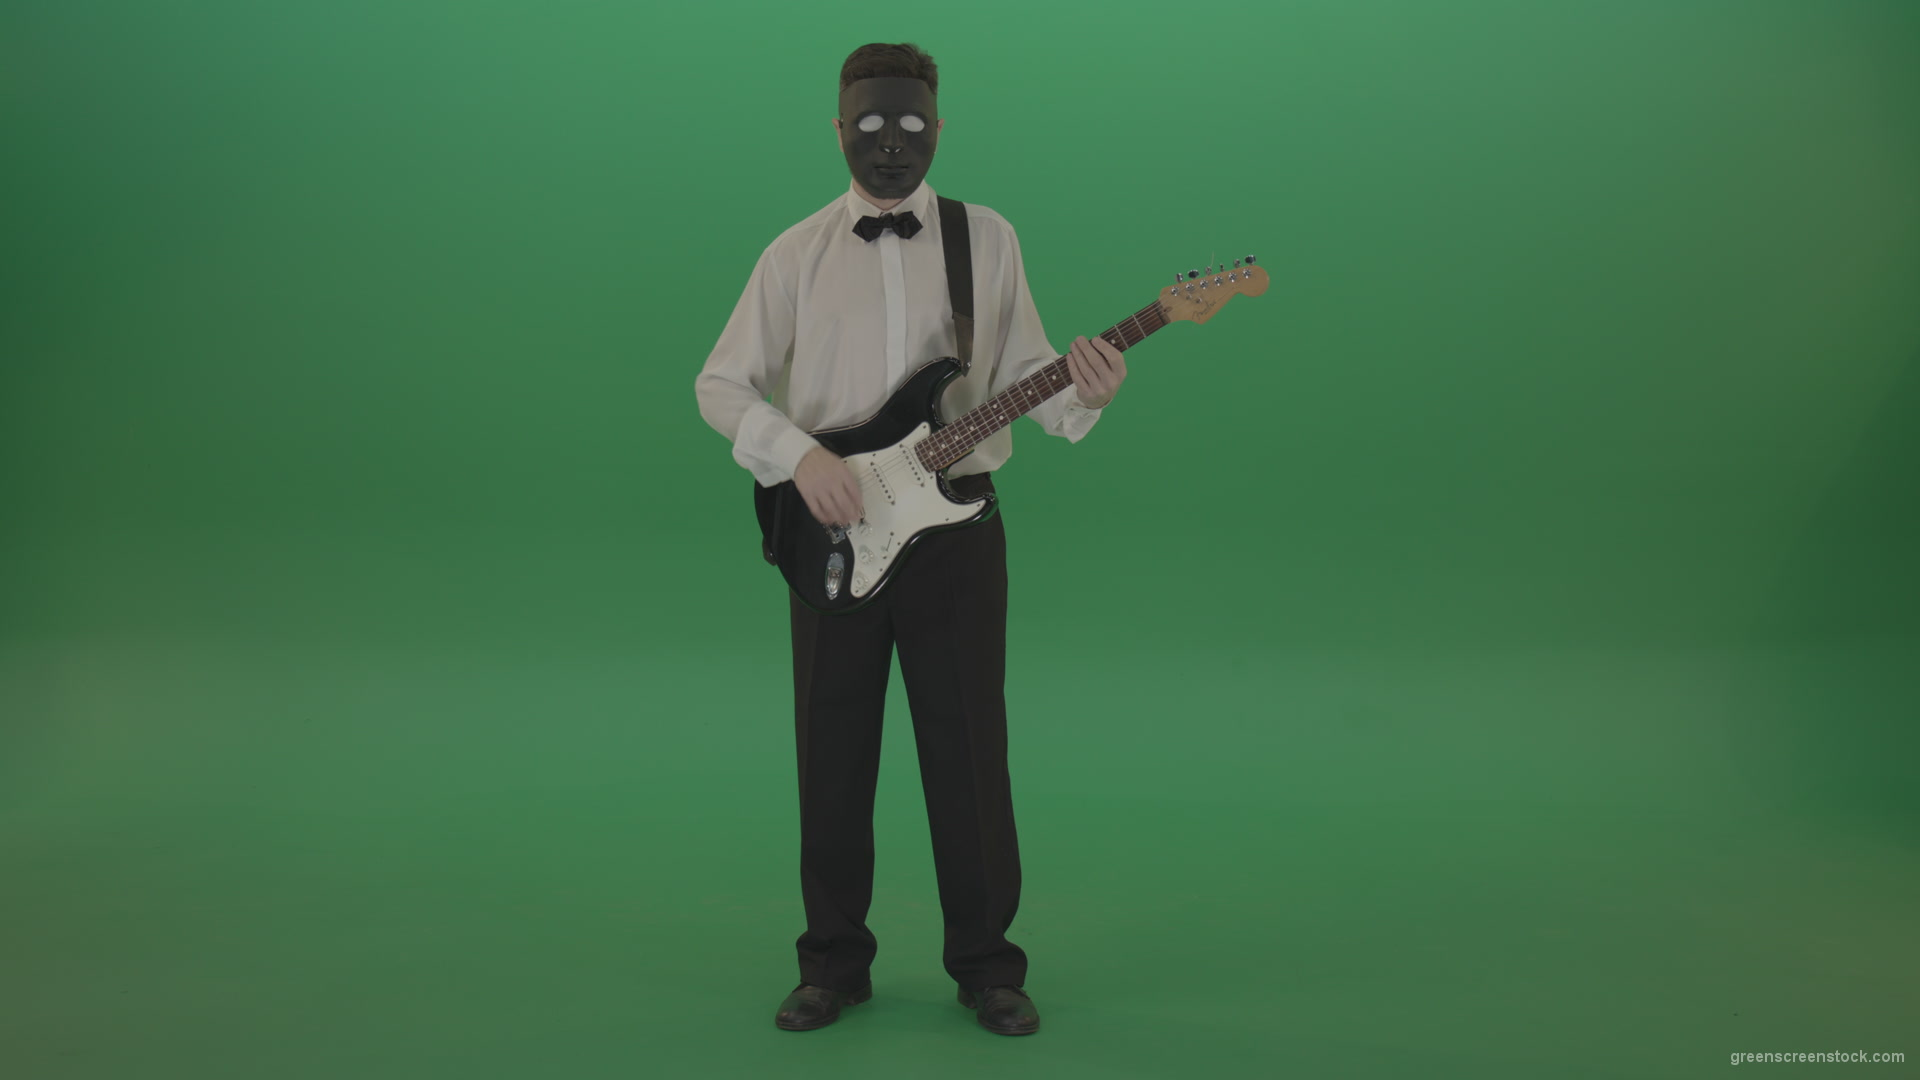 Classic-guitarist-in-white-shirt-play-guitar-in-mask-isolated-on-green-screen_007 Green Screen Stock